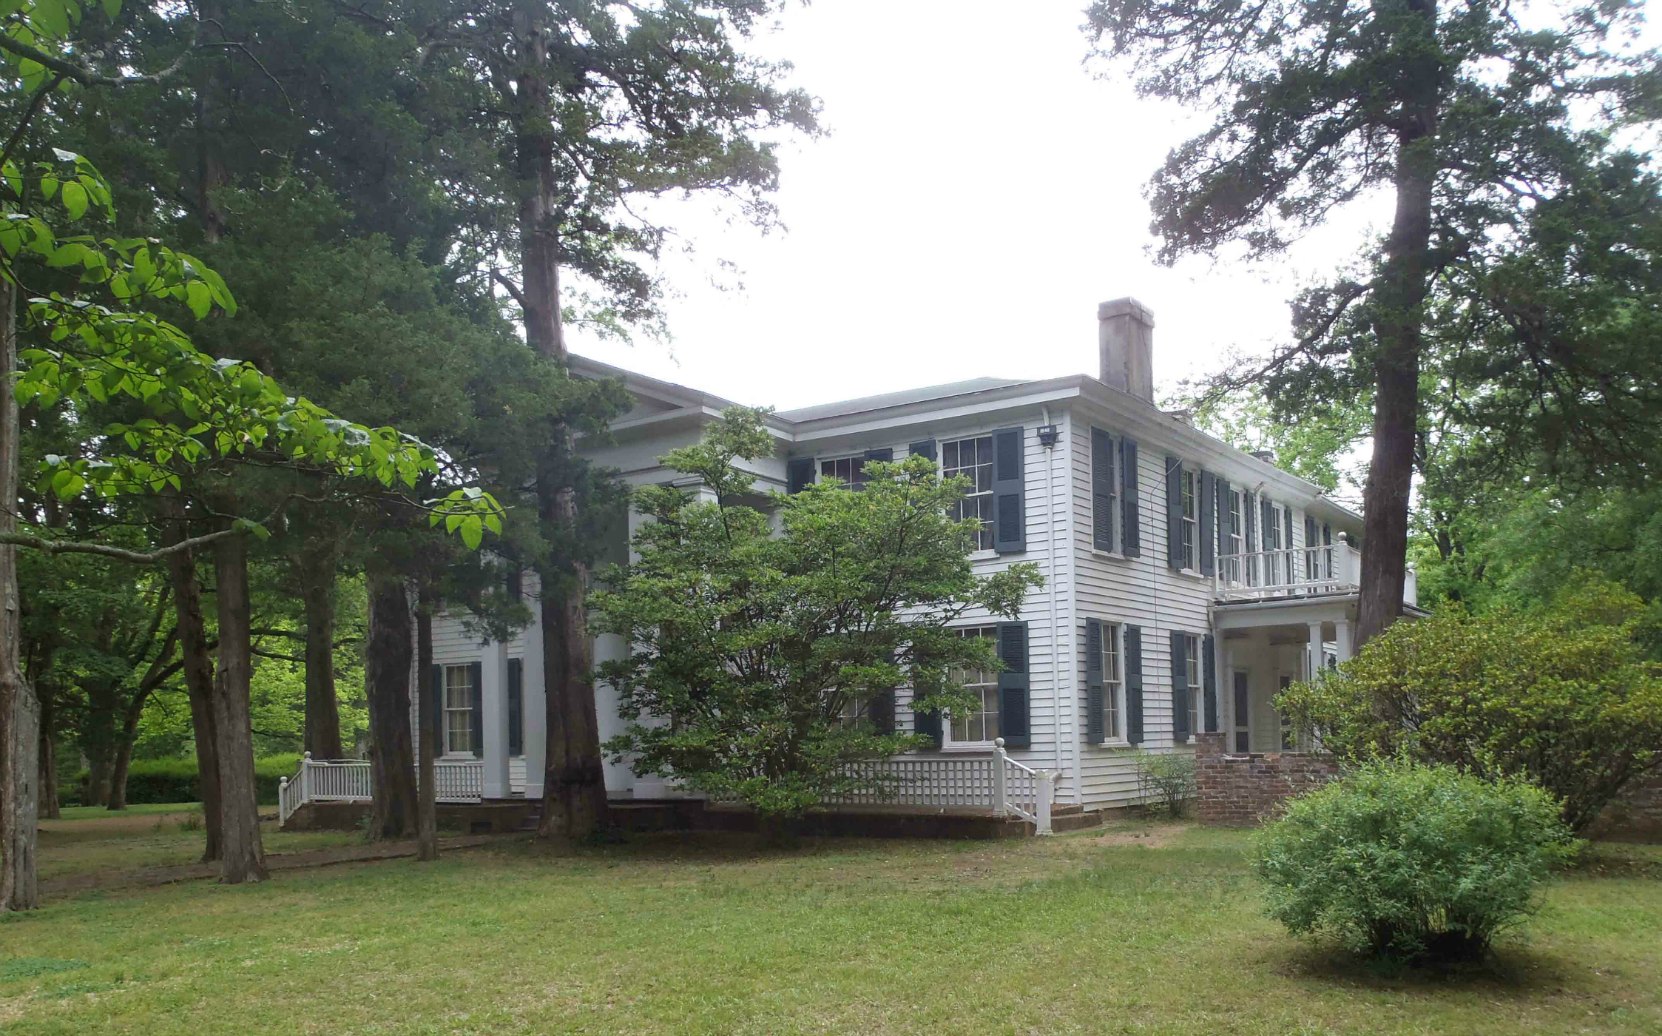 Rowan Oak, William Faulkner's home from 1930 until his death in 1962.